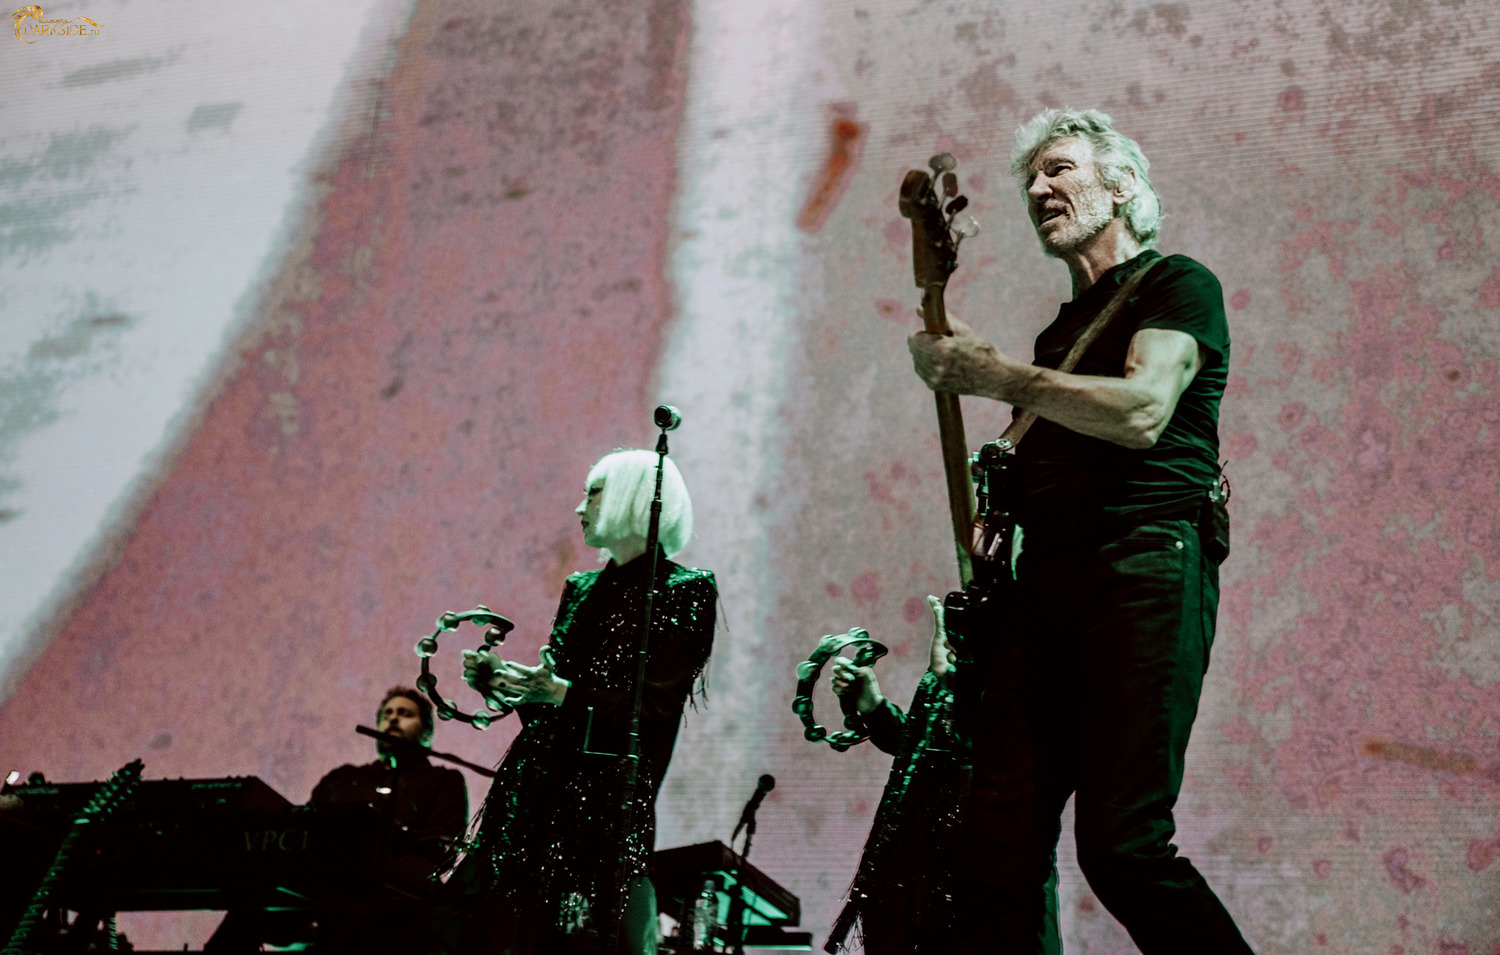 Roger Waters 